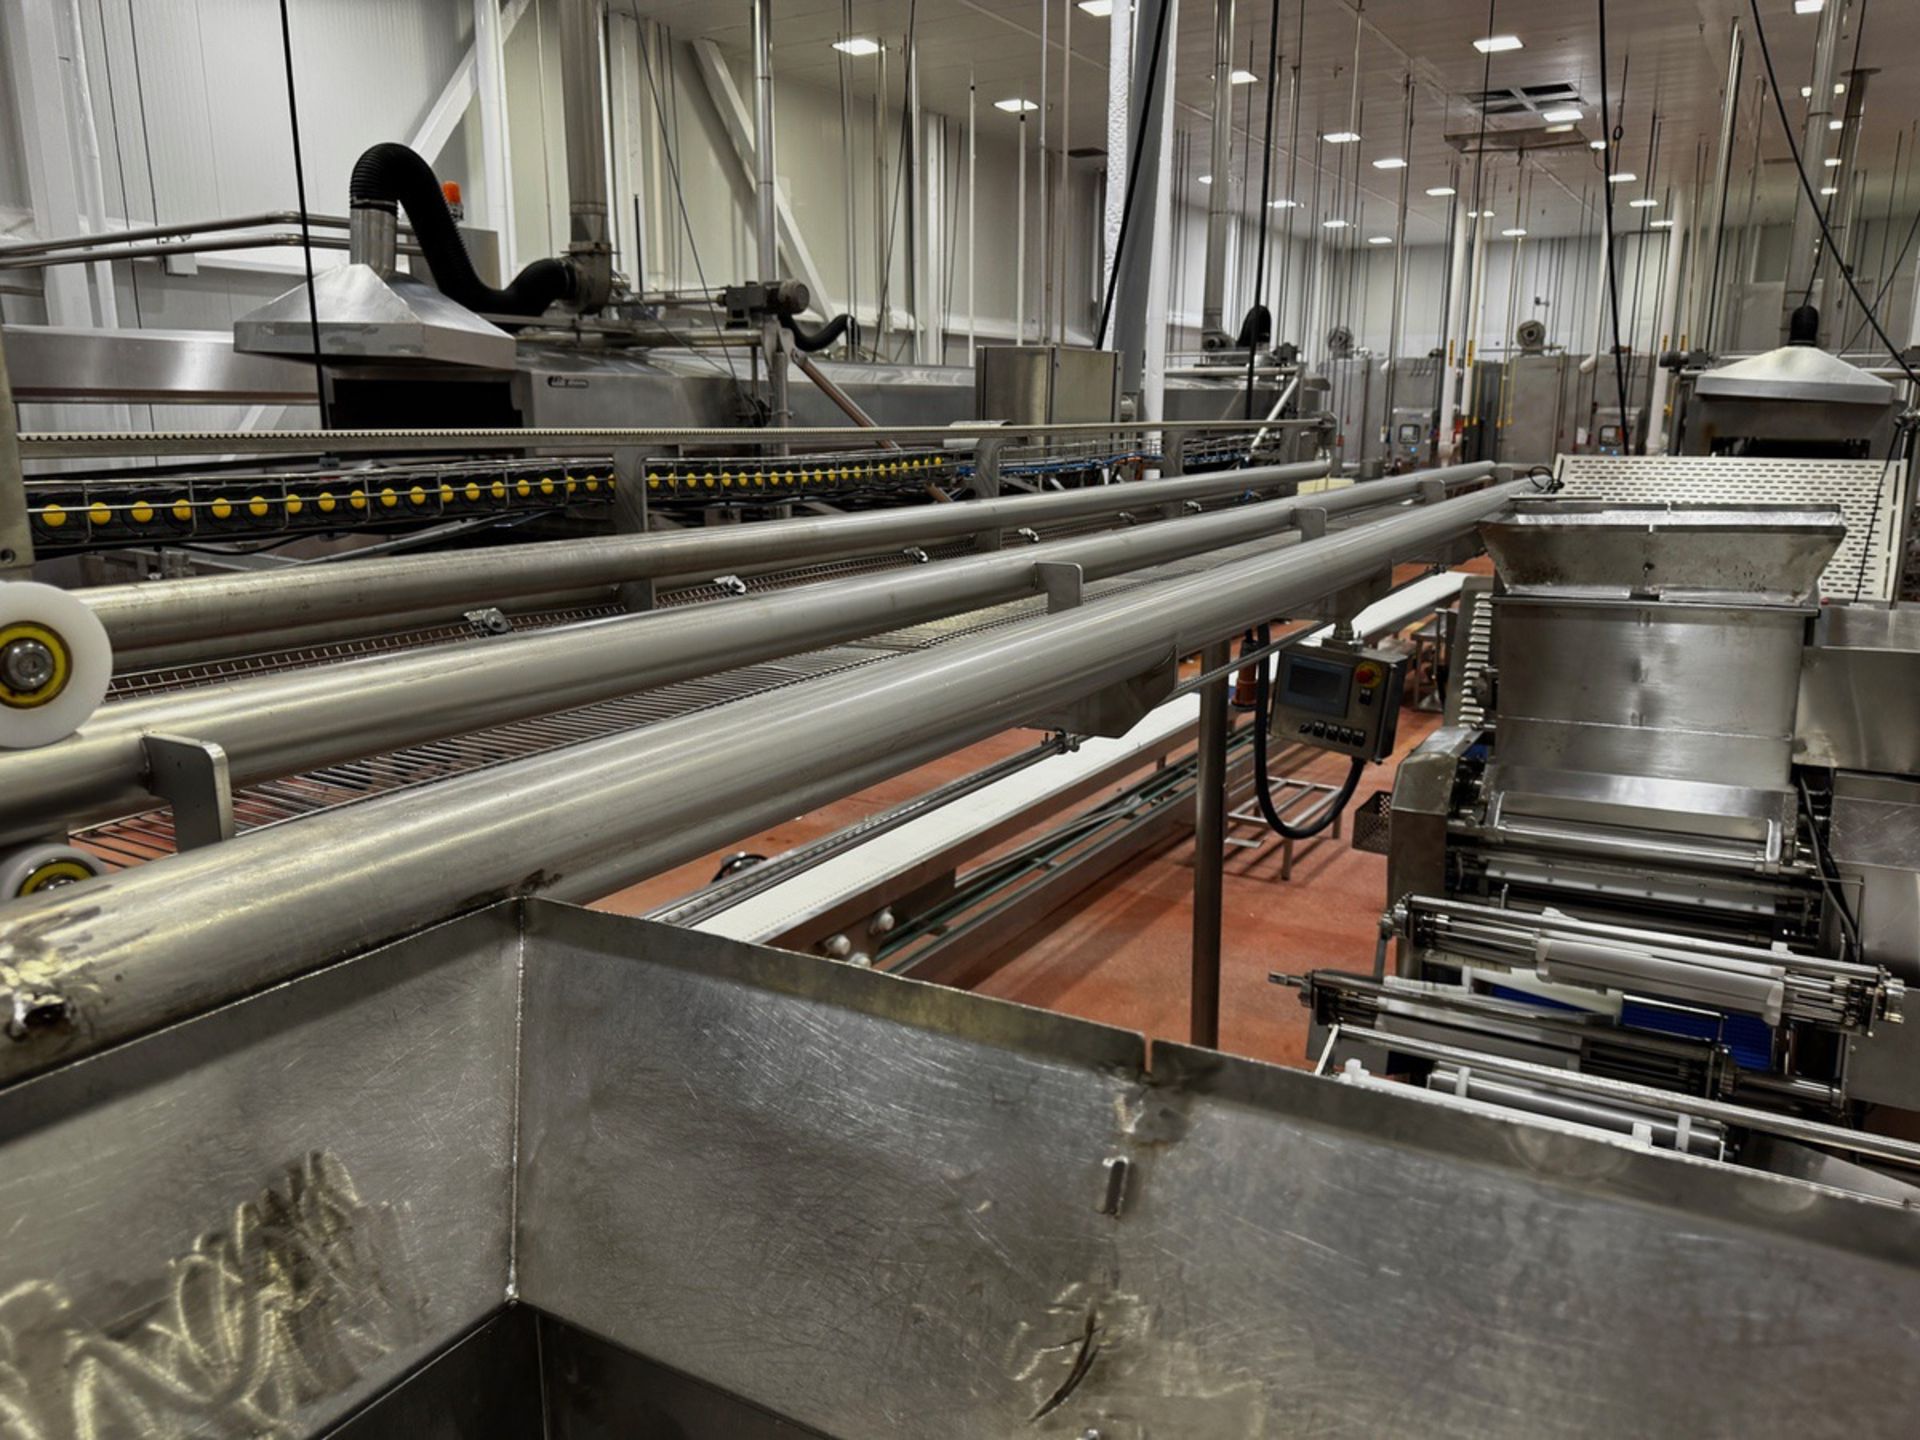 Stainless Steel Frame Multi-Drop Automatic Dough Distribution System, - Subj to Bulk | Rig Fee $400 - Image 4 of 5